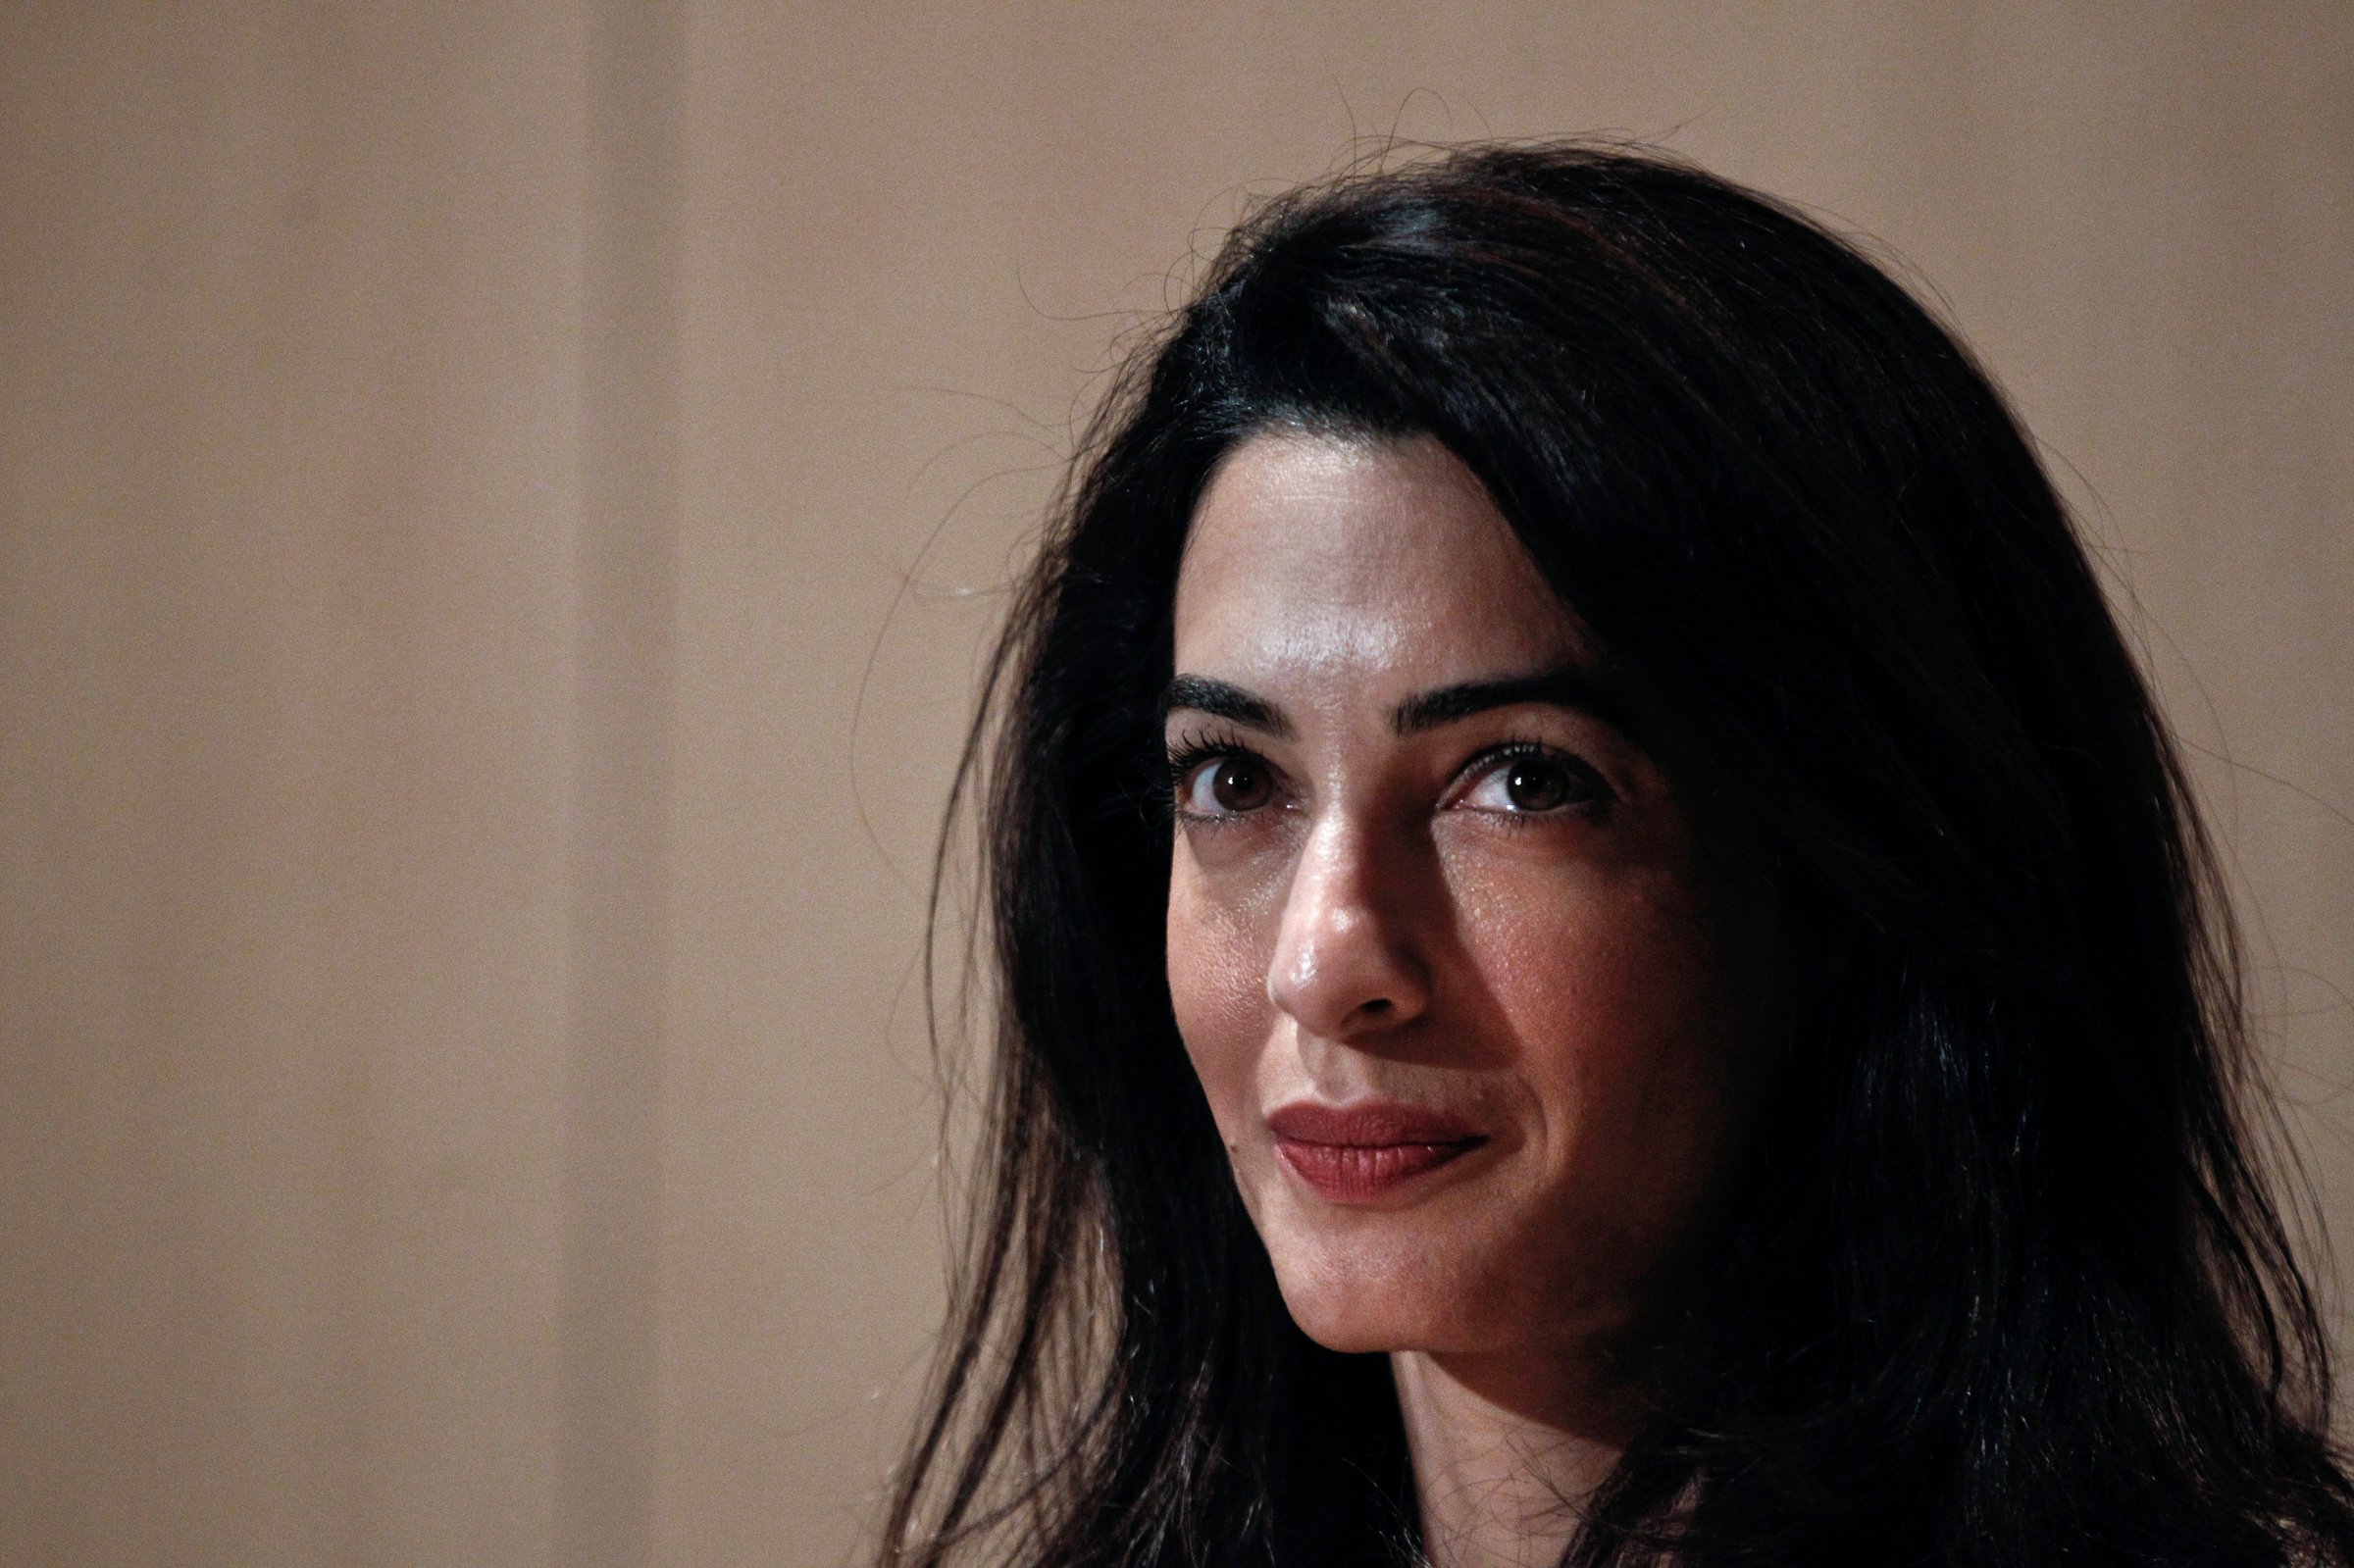 Human rights lawyer Amal Alamuddin Clooney looks on during a news conference at the Acropolis museum in Athens